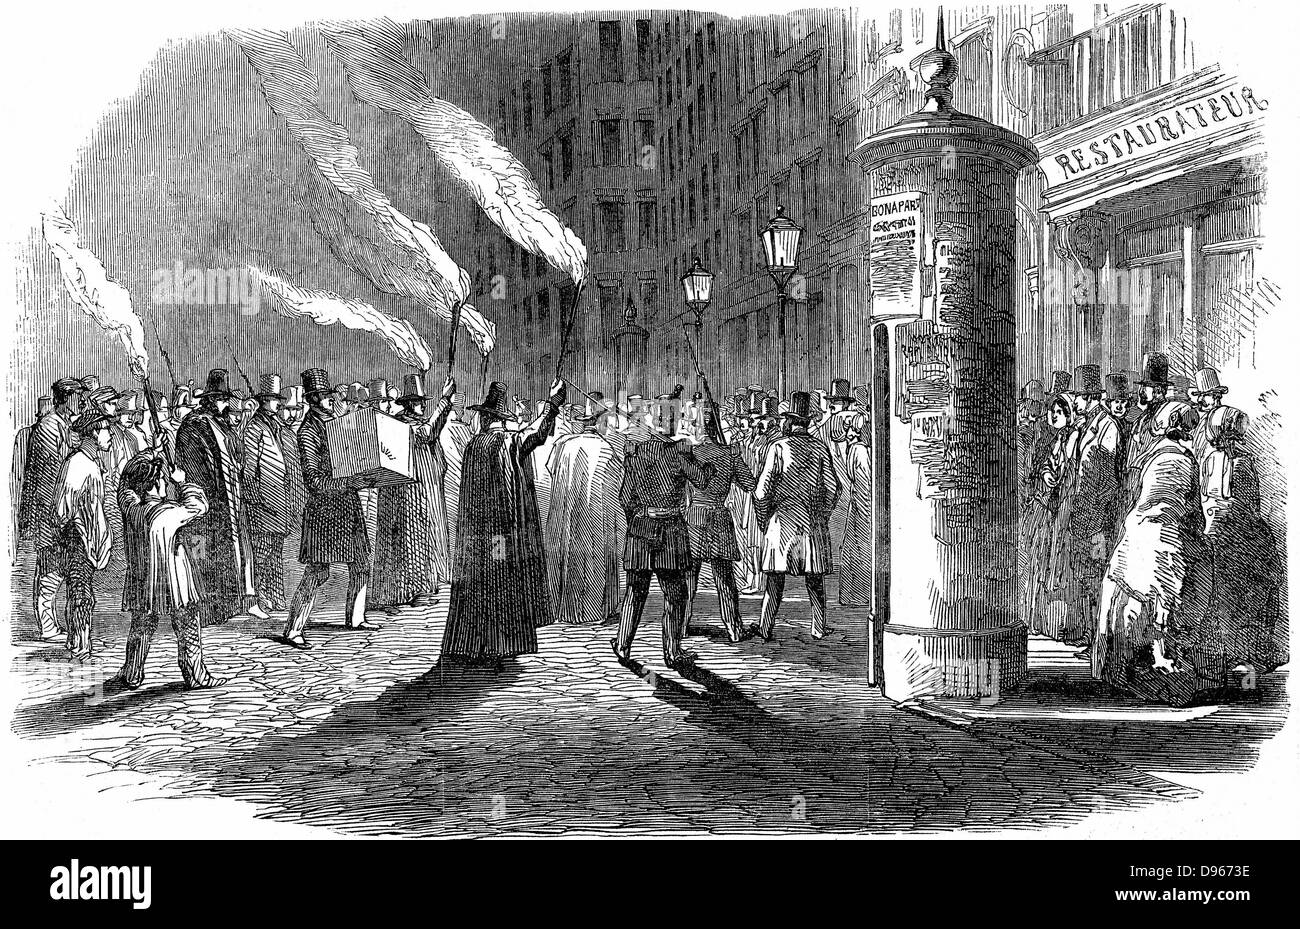 Revolution in France: Election of a President of the Republic, December, 1848. Taking the ballot boxes to the Hotel de Ville, Paris. Wood engraving 1848. Stock Photo